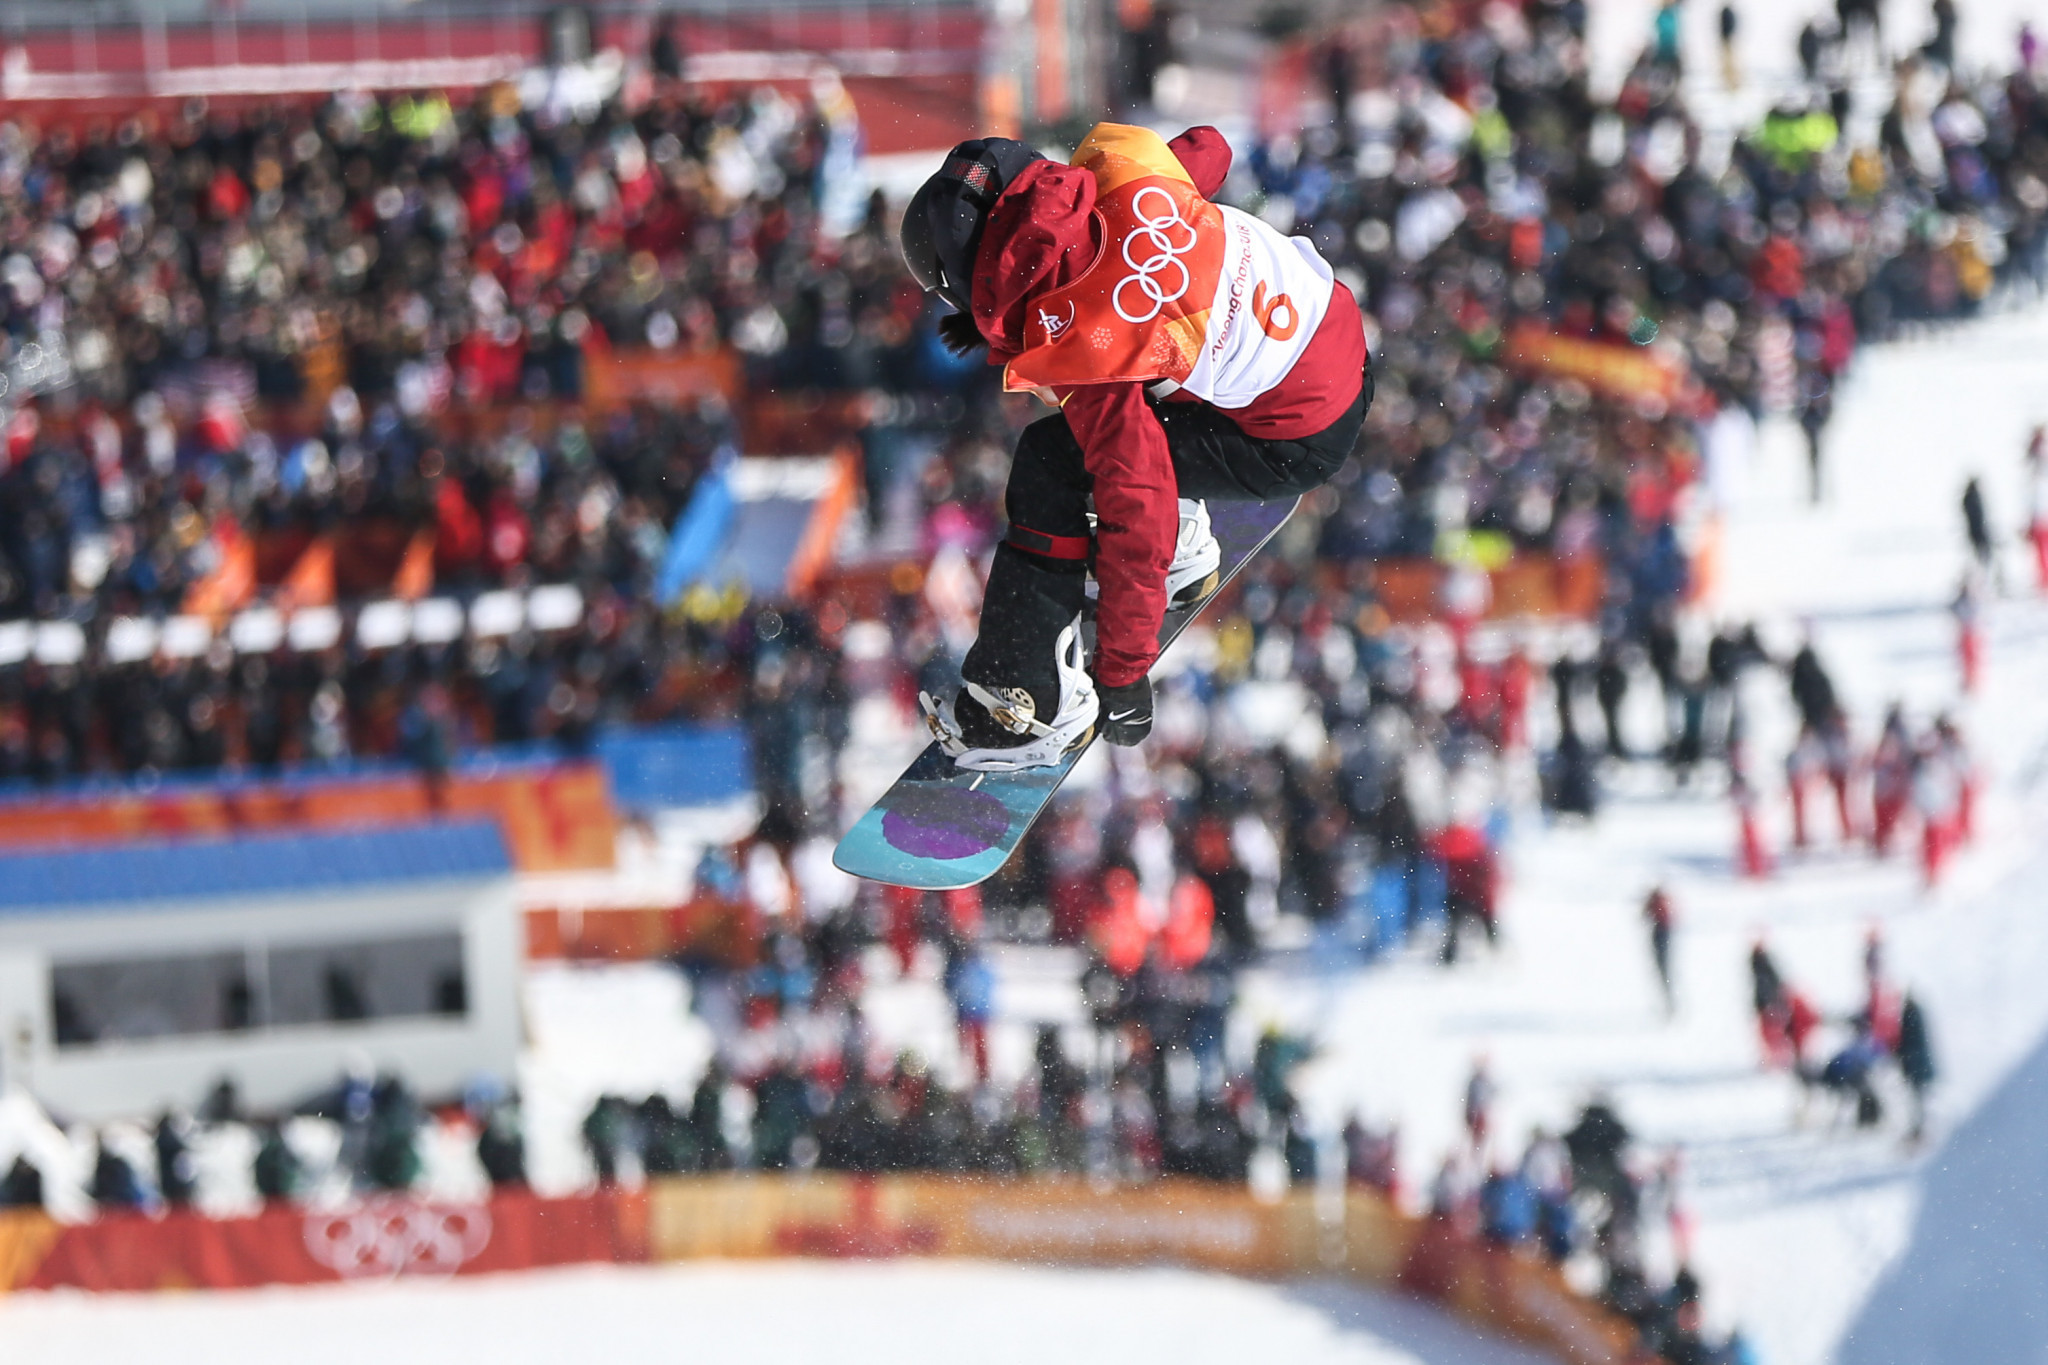 Liu Jiayu secured China's first medal of Pyeongchang 2018 with silver ©Getty Images